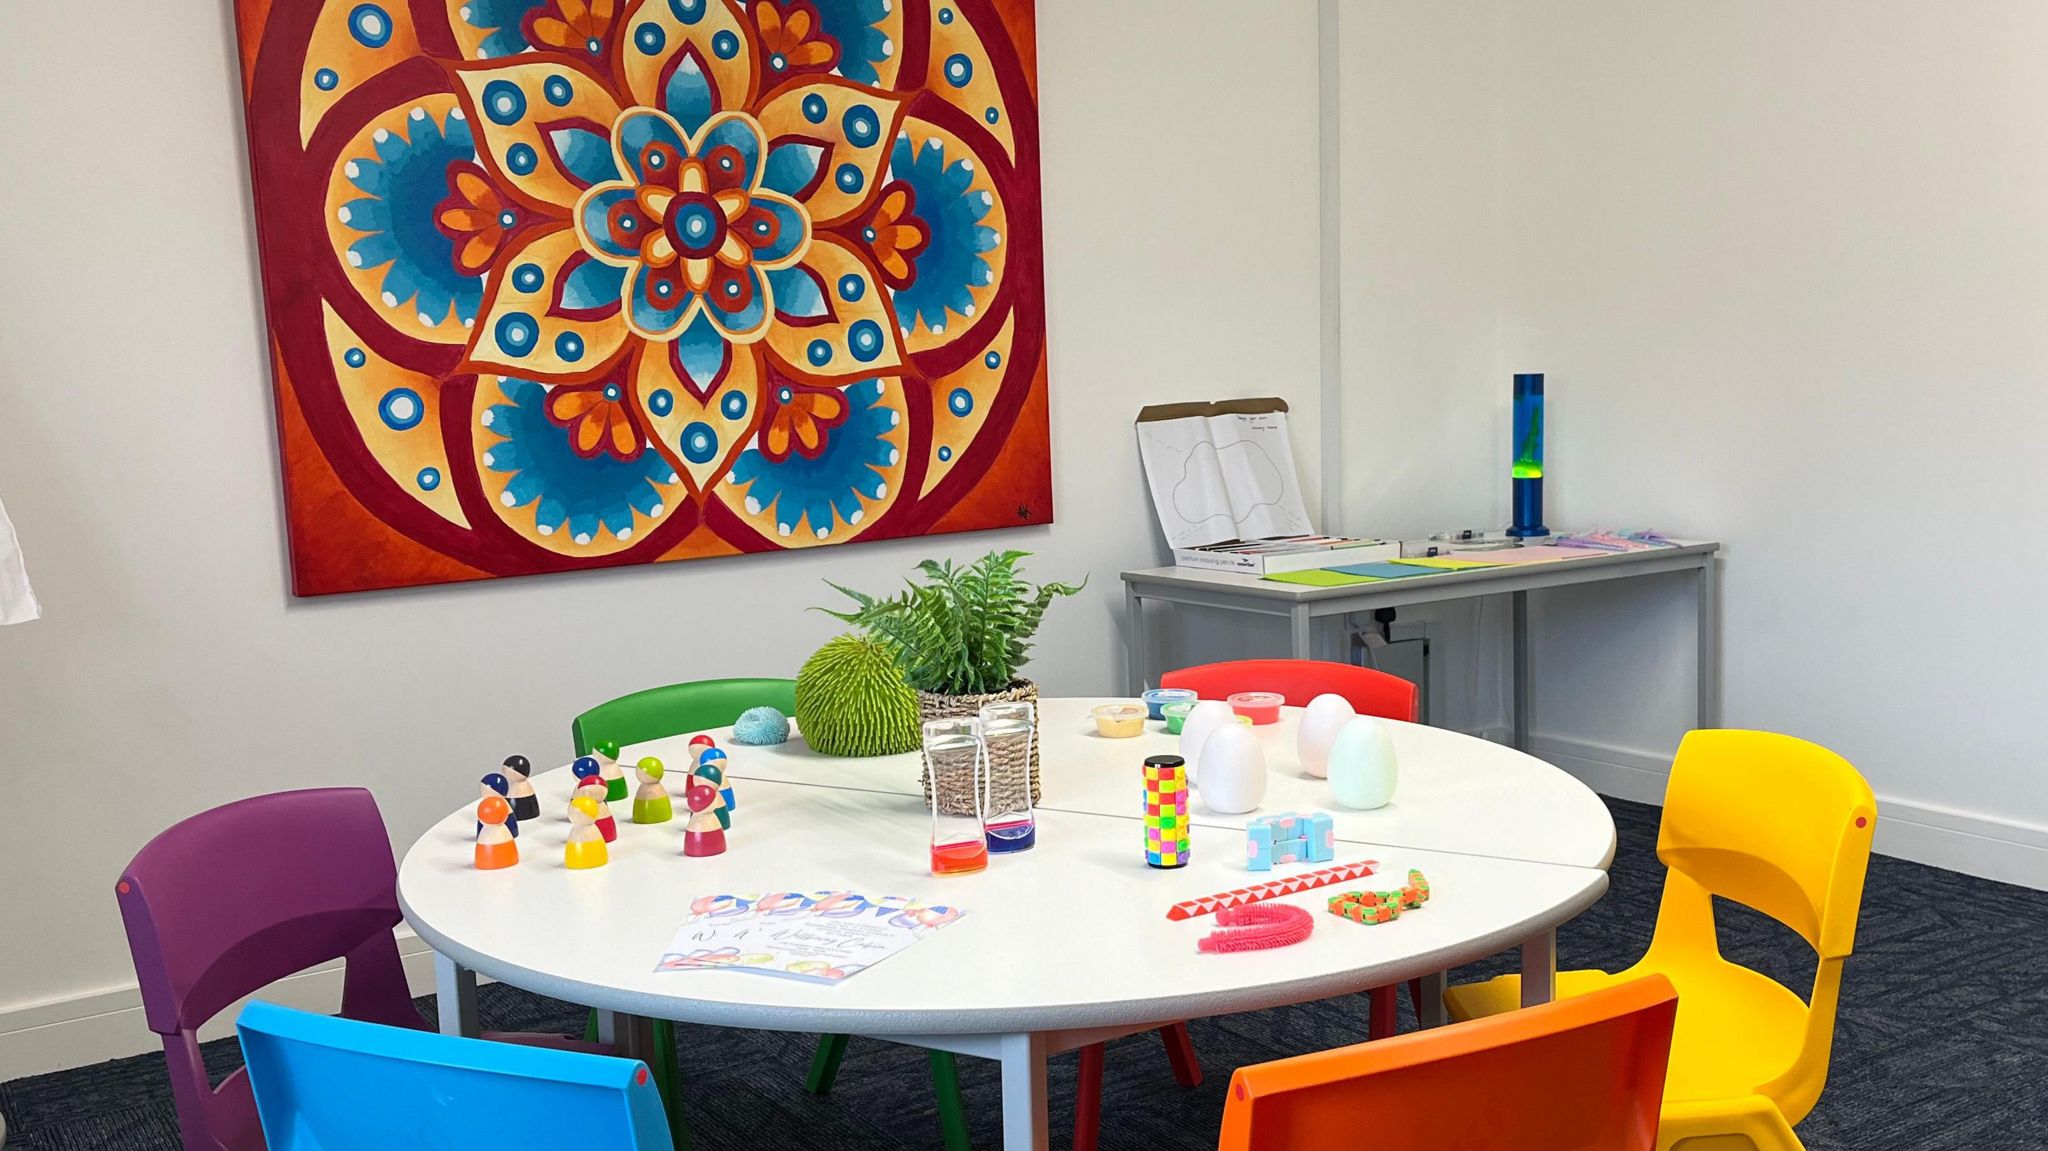 Table in one of the rooms of the new wellbeing hub with toys on it and brightly coloured chairs